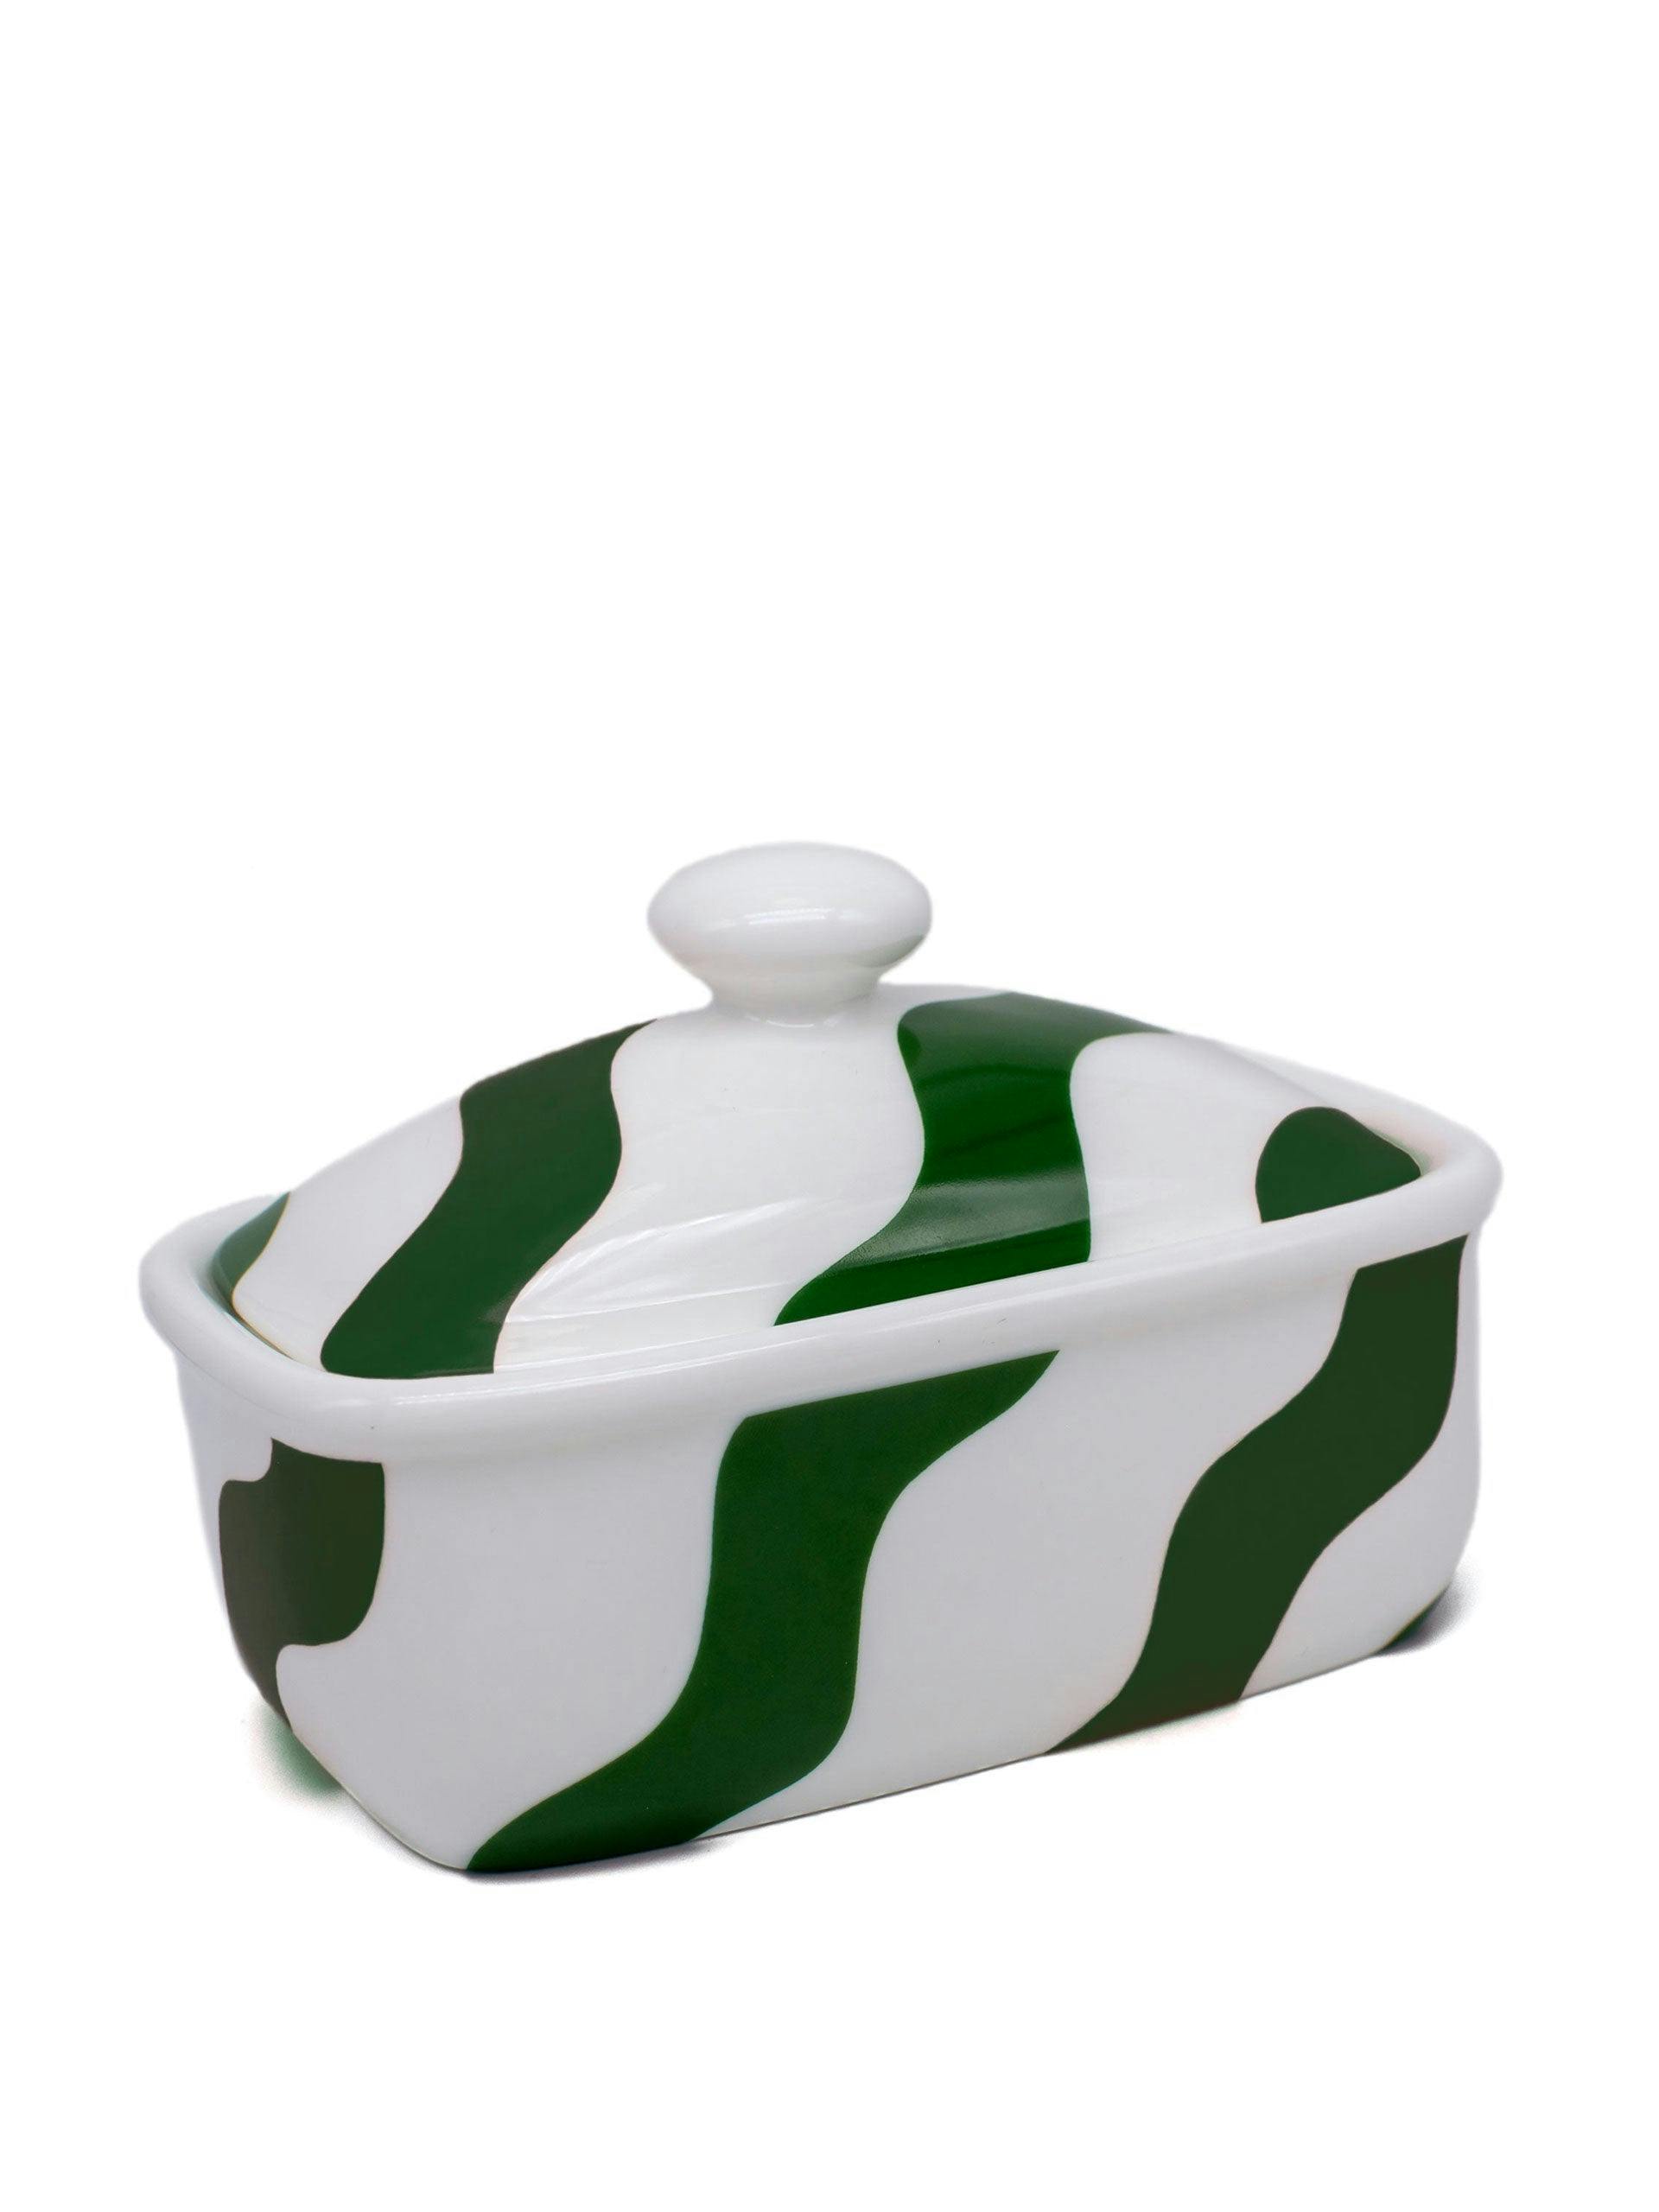 Green and white butter dish